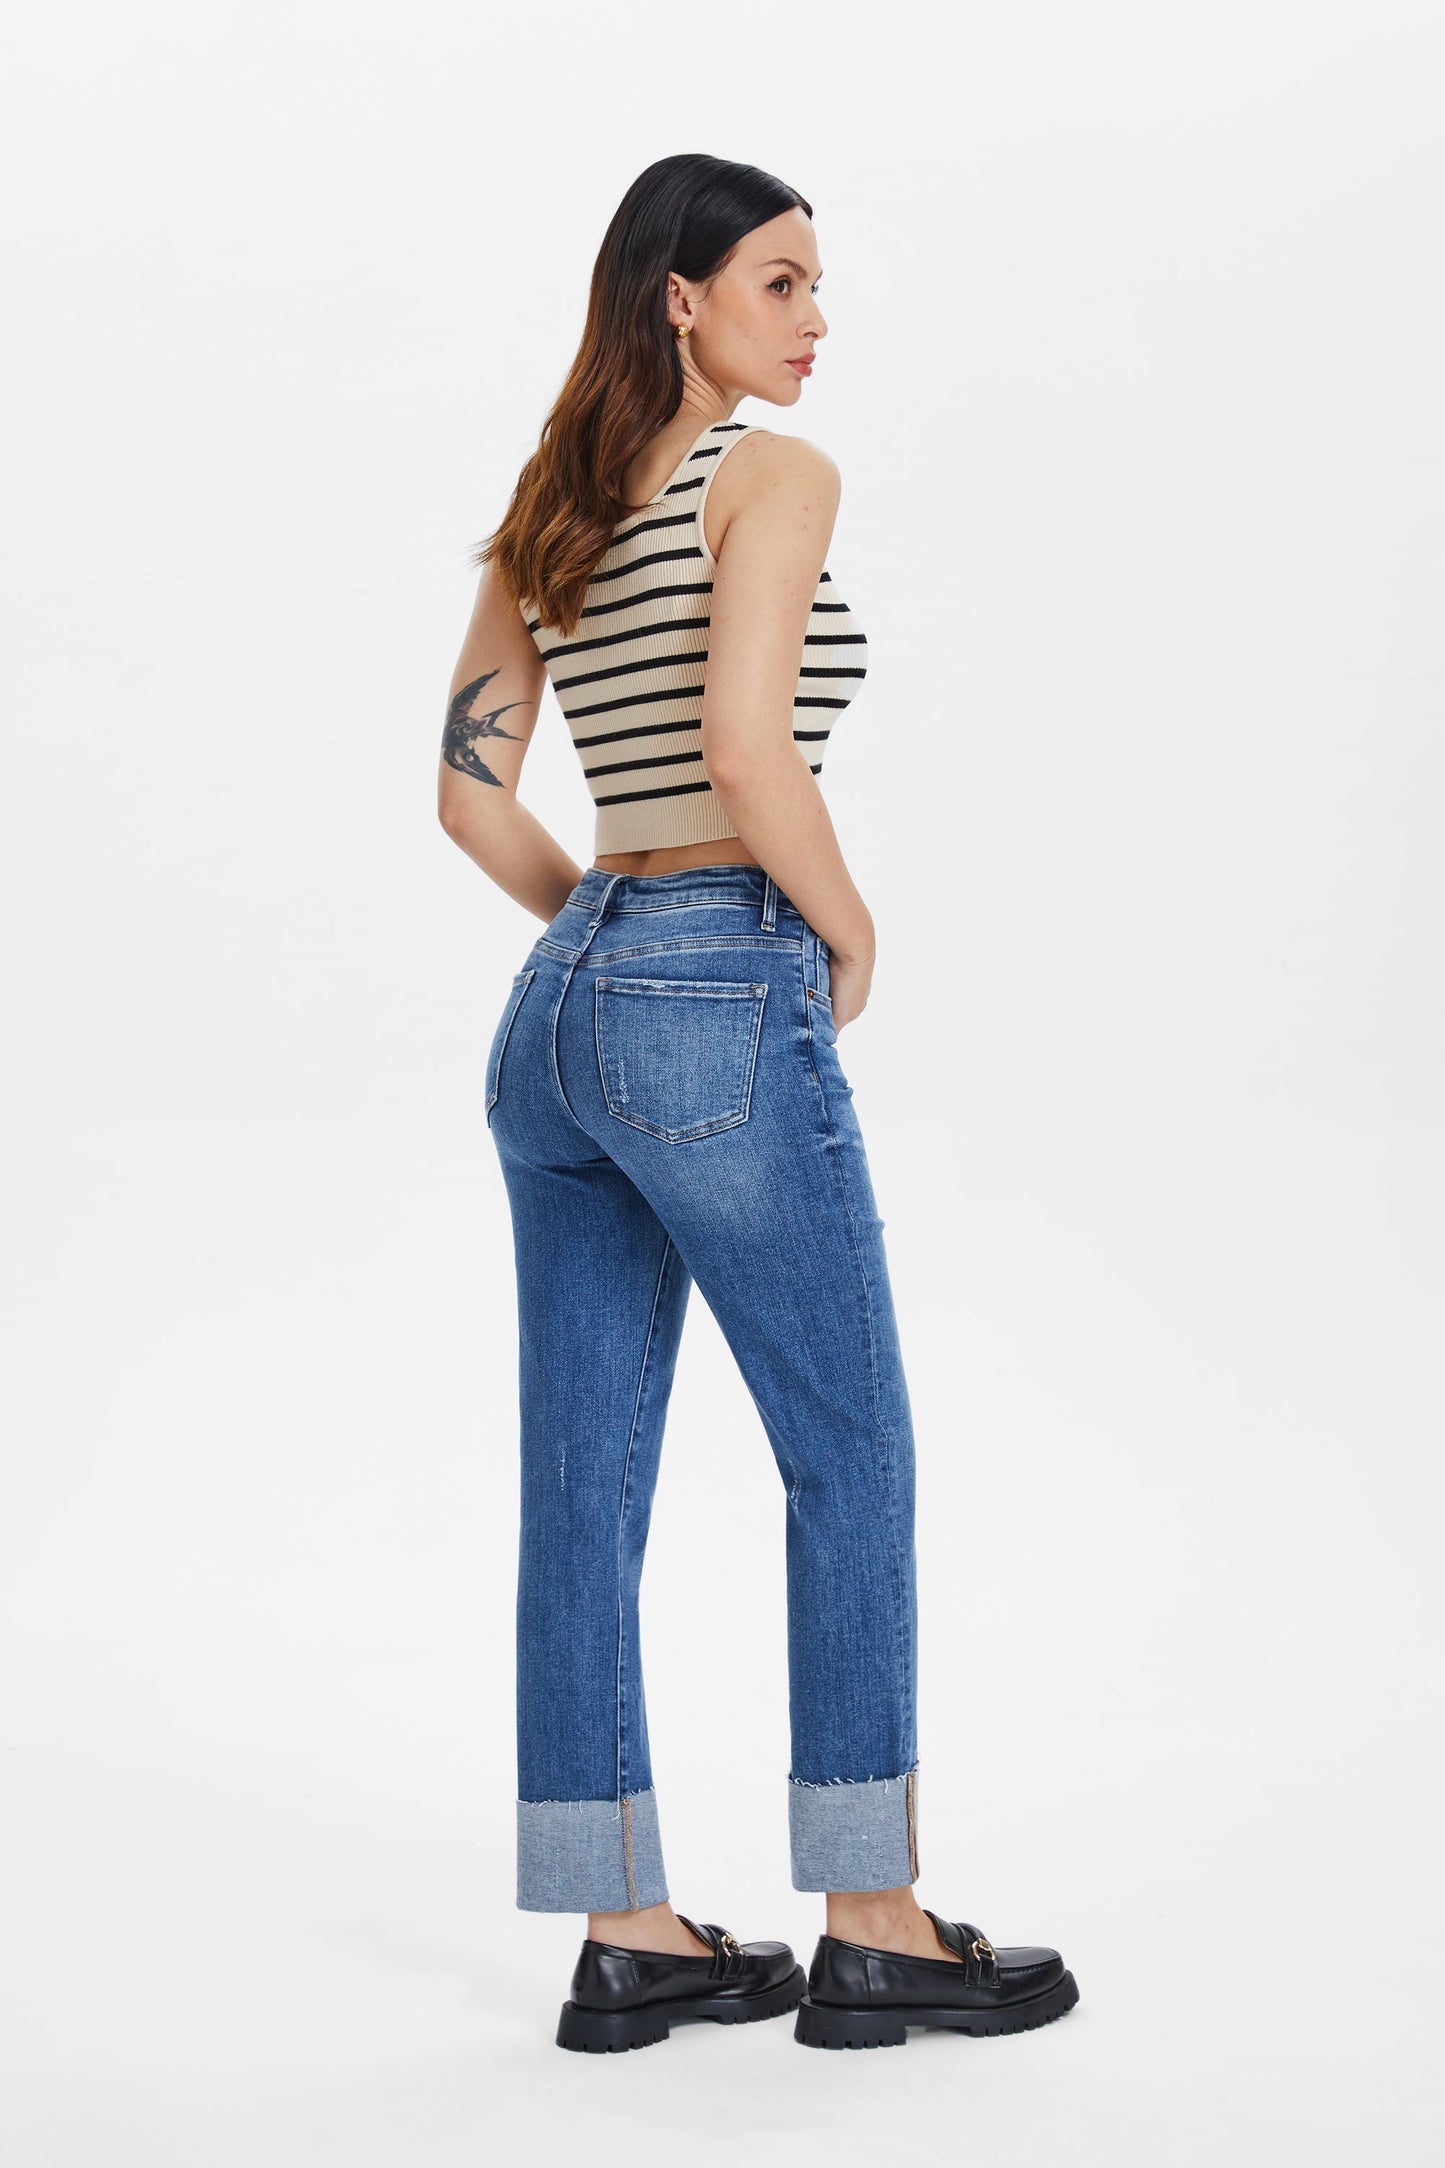 HIGH RISE STRAIGHT LEG JEANS WITH ROLLED HEM BYT5153 SURF BLUE